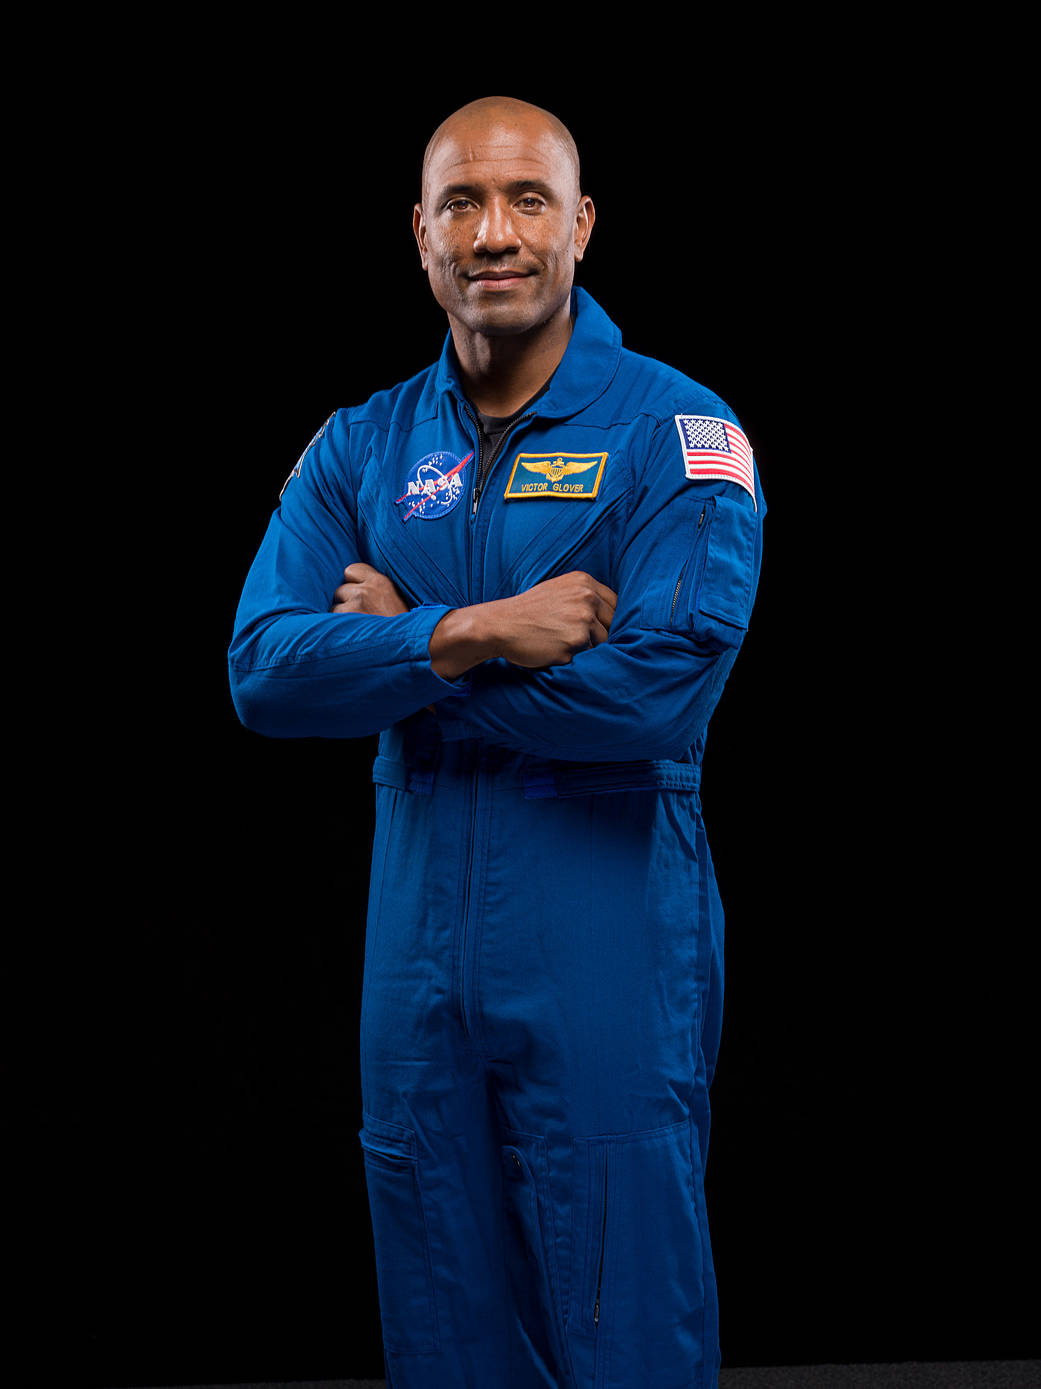 SpaceX Crew-1 Pilot Victor Glover of NASA